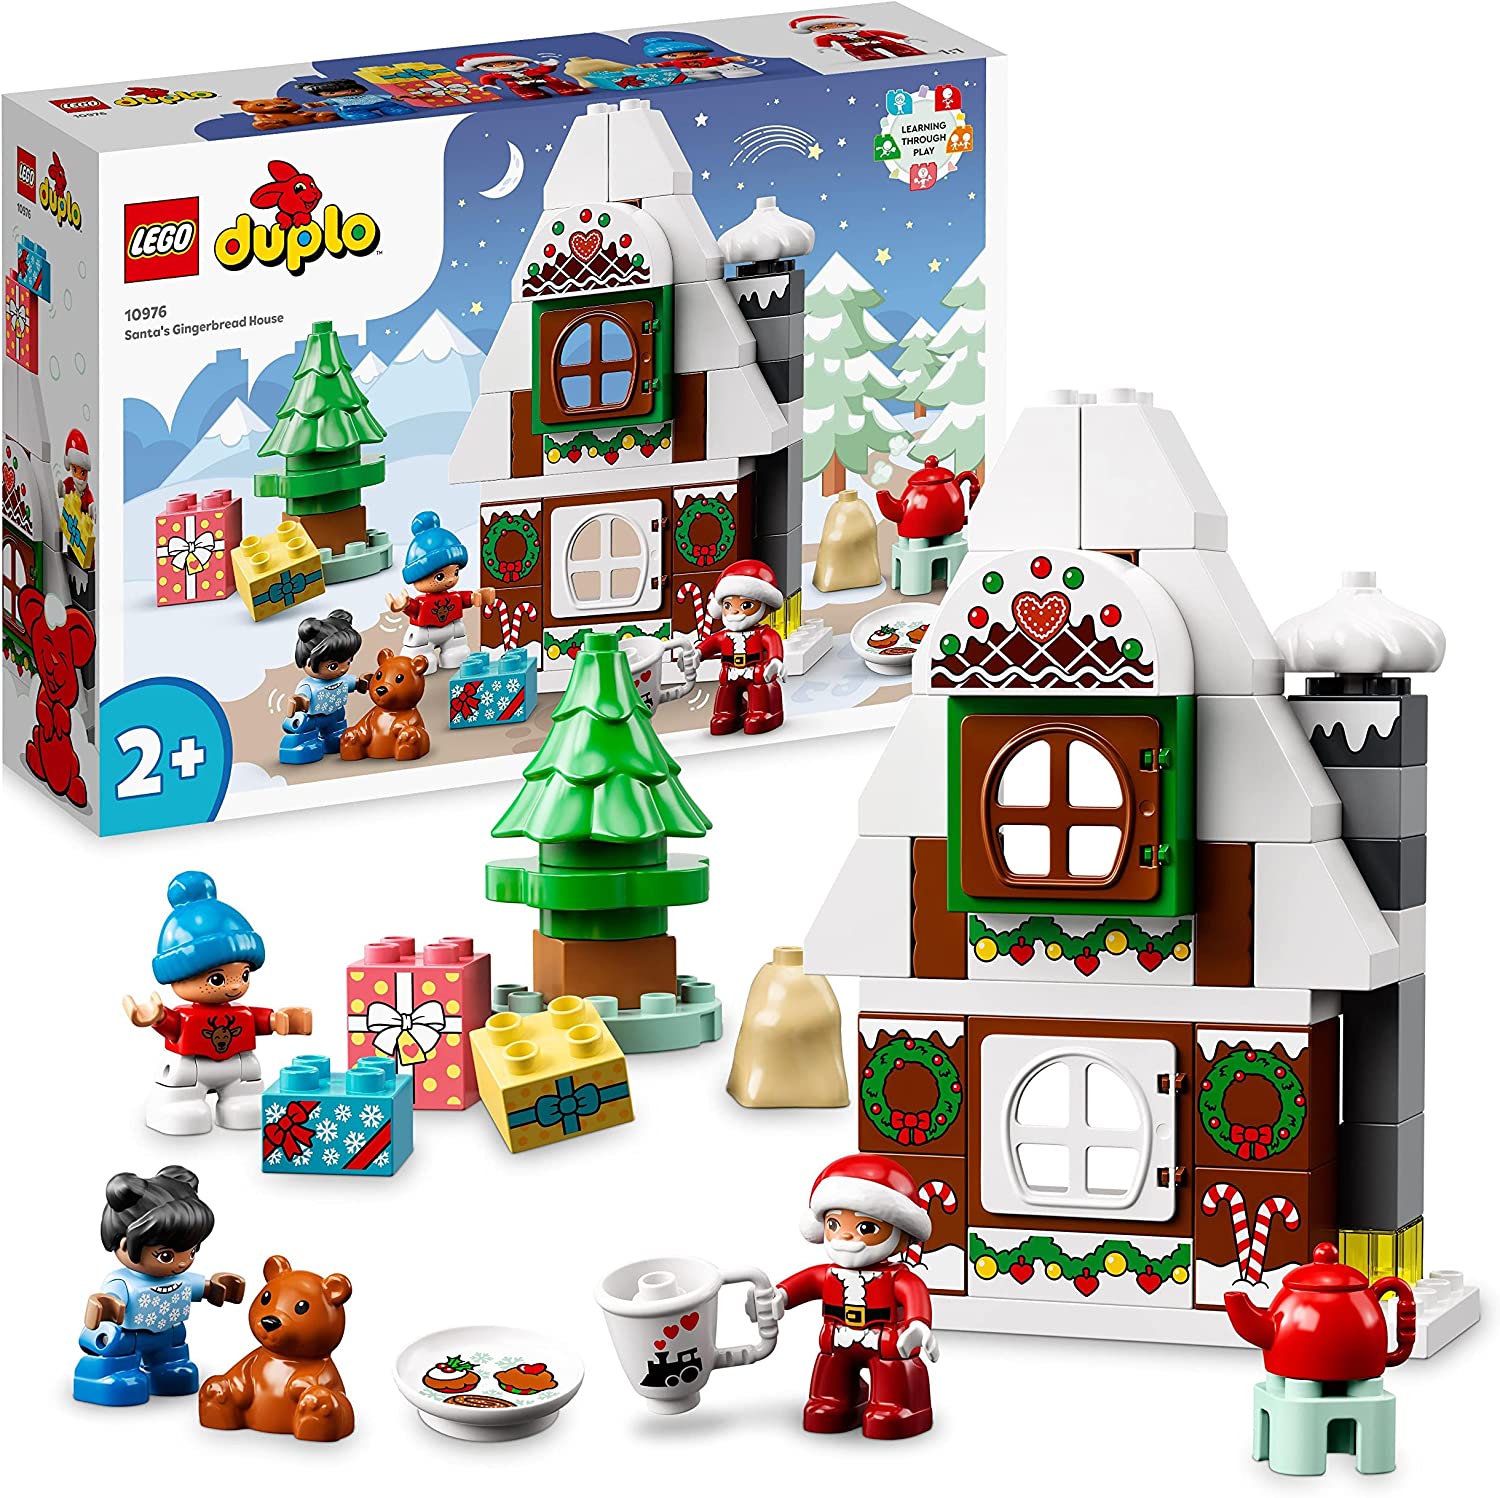 LEGO Duplo 10976 Gingerbread House with Santa Claus Figure, Christmas House Toy, Toddlers from 2 Years